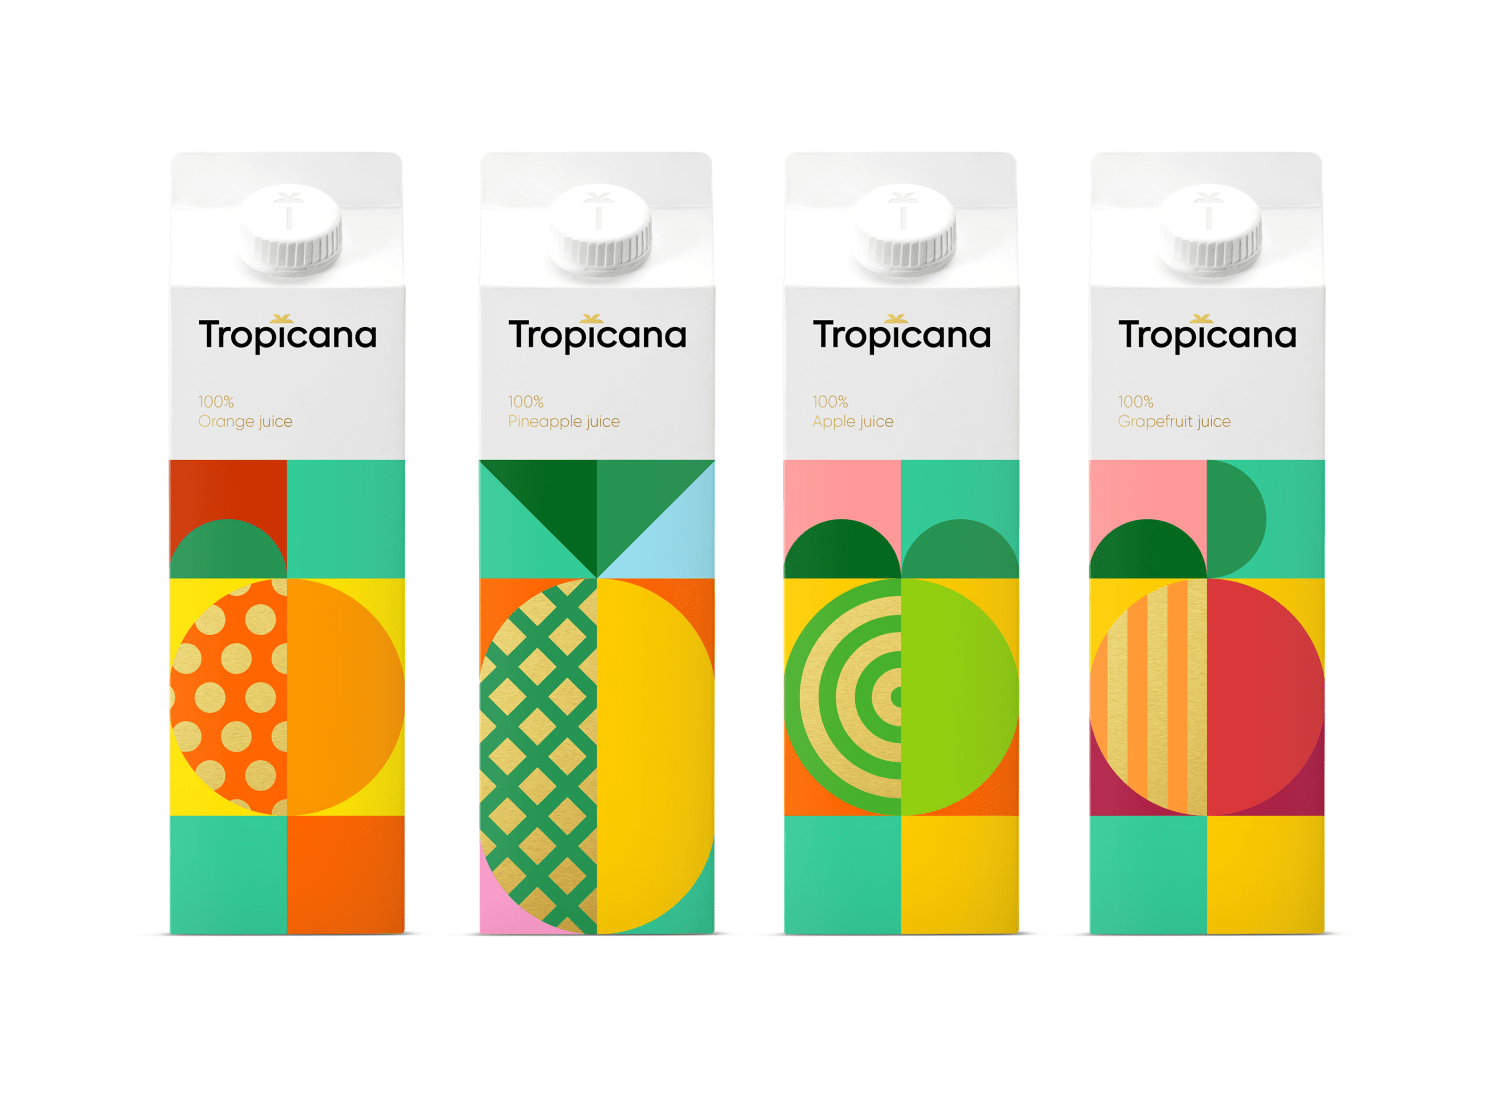 Concept Design for Tropicana with Clear Simplicity and Geometry